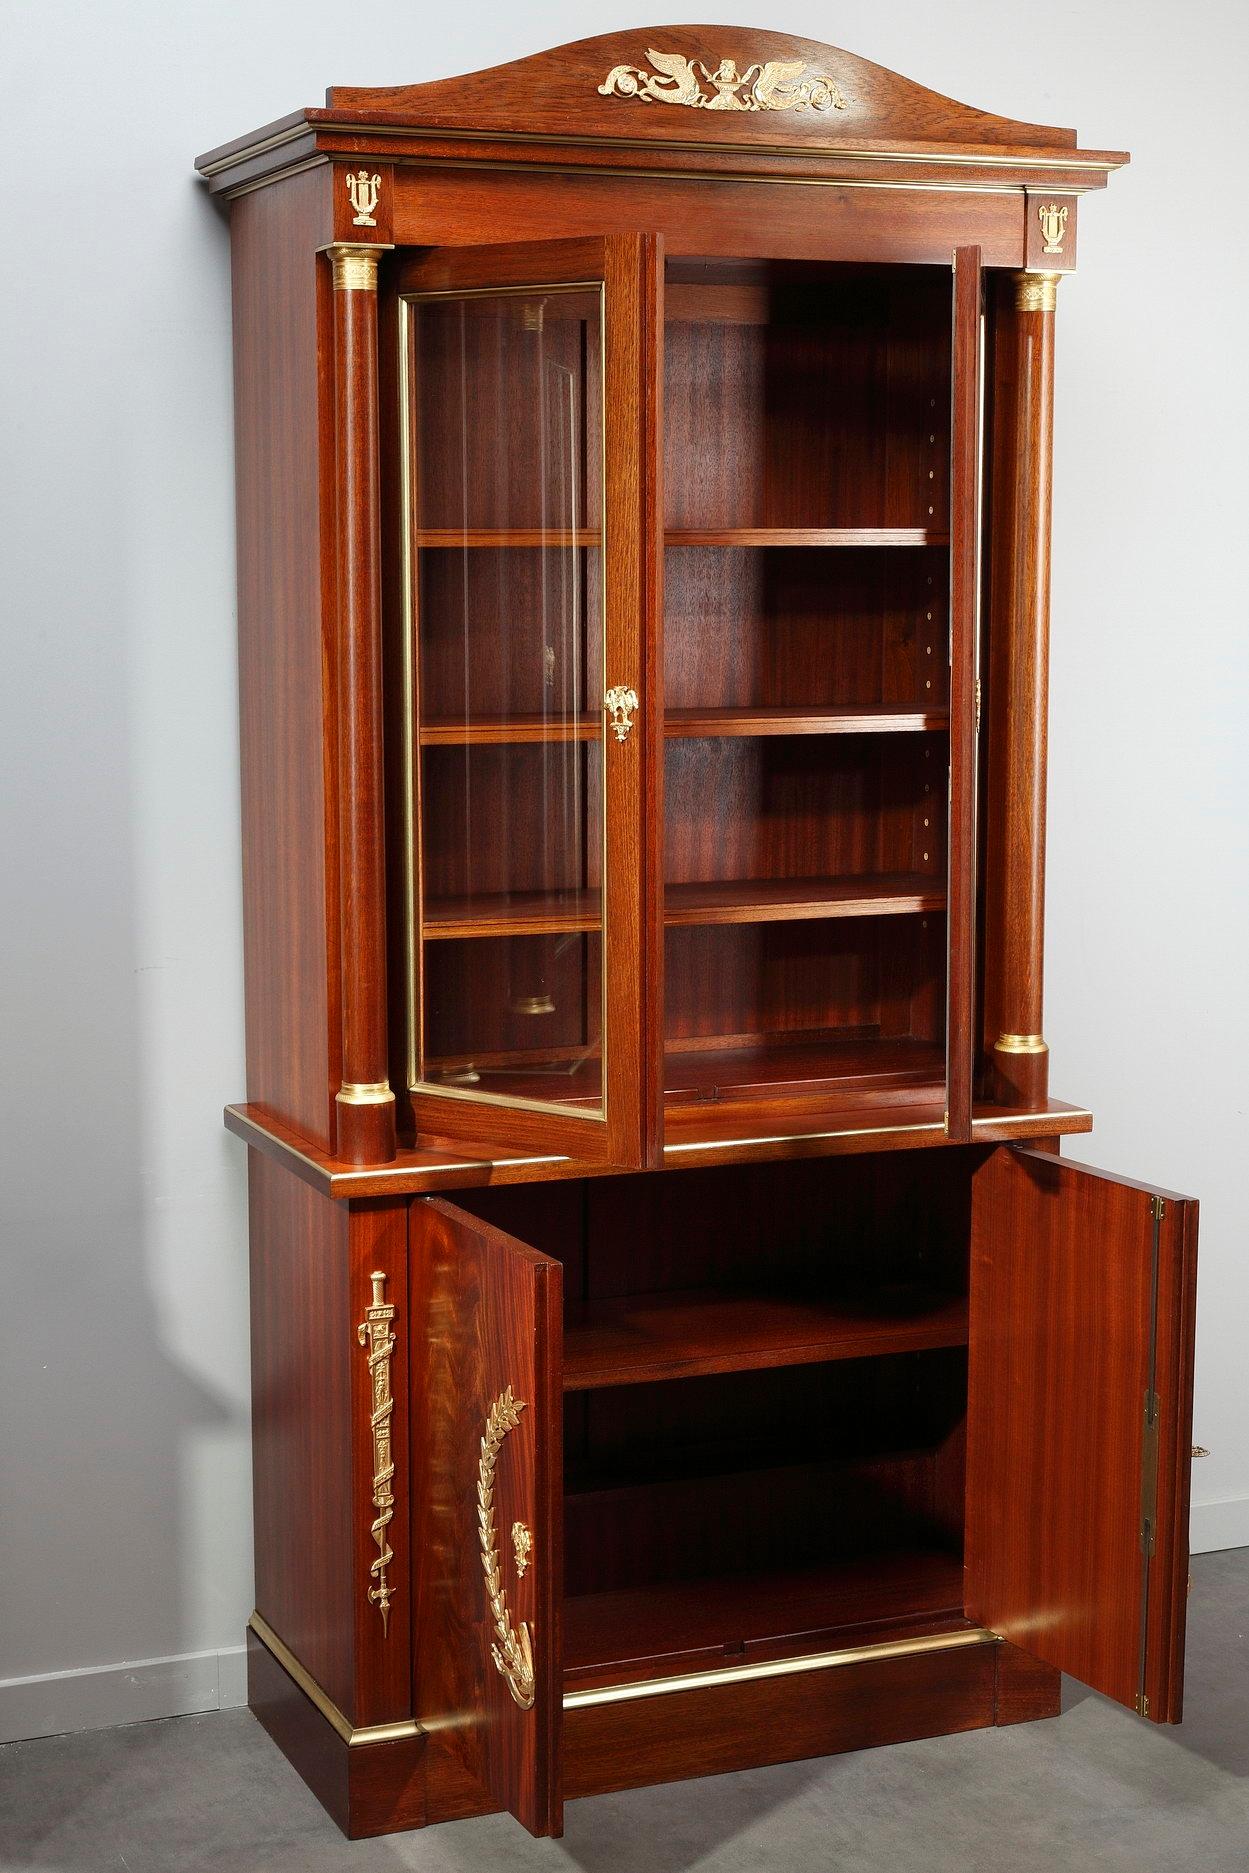 20th Century Early 19th Century Empire-Style Bookcases by Maison Jansen